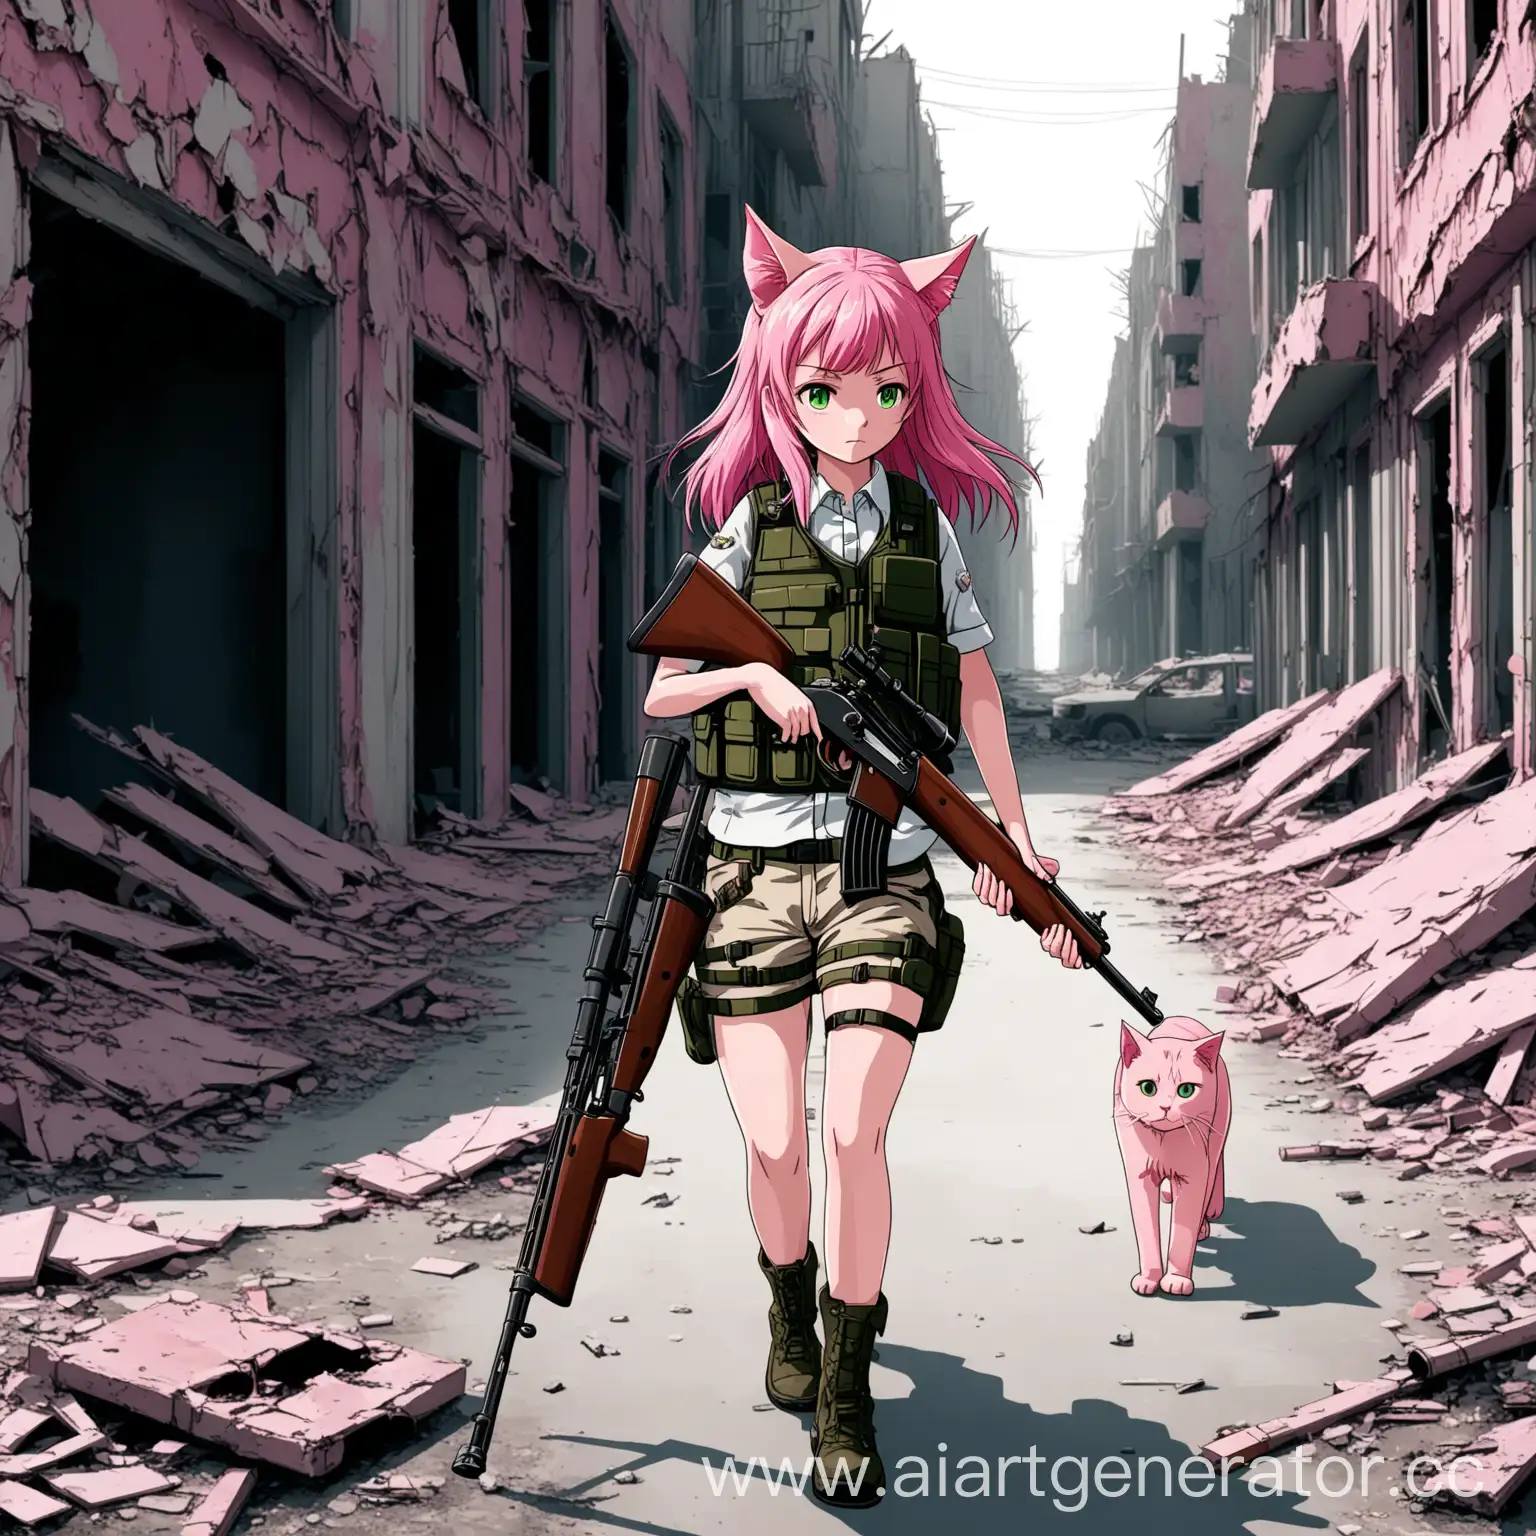 PinkHaired-CatEared-Girl-with-BoltAction-Rifle-Strolling-Through-Abandoned-City